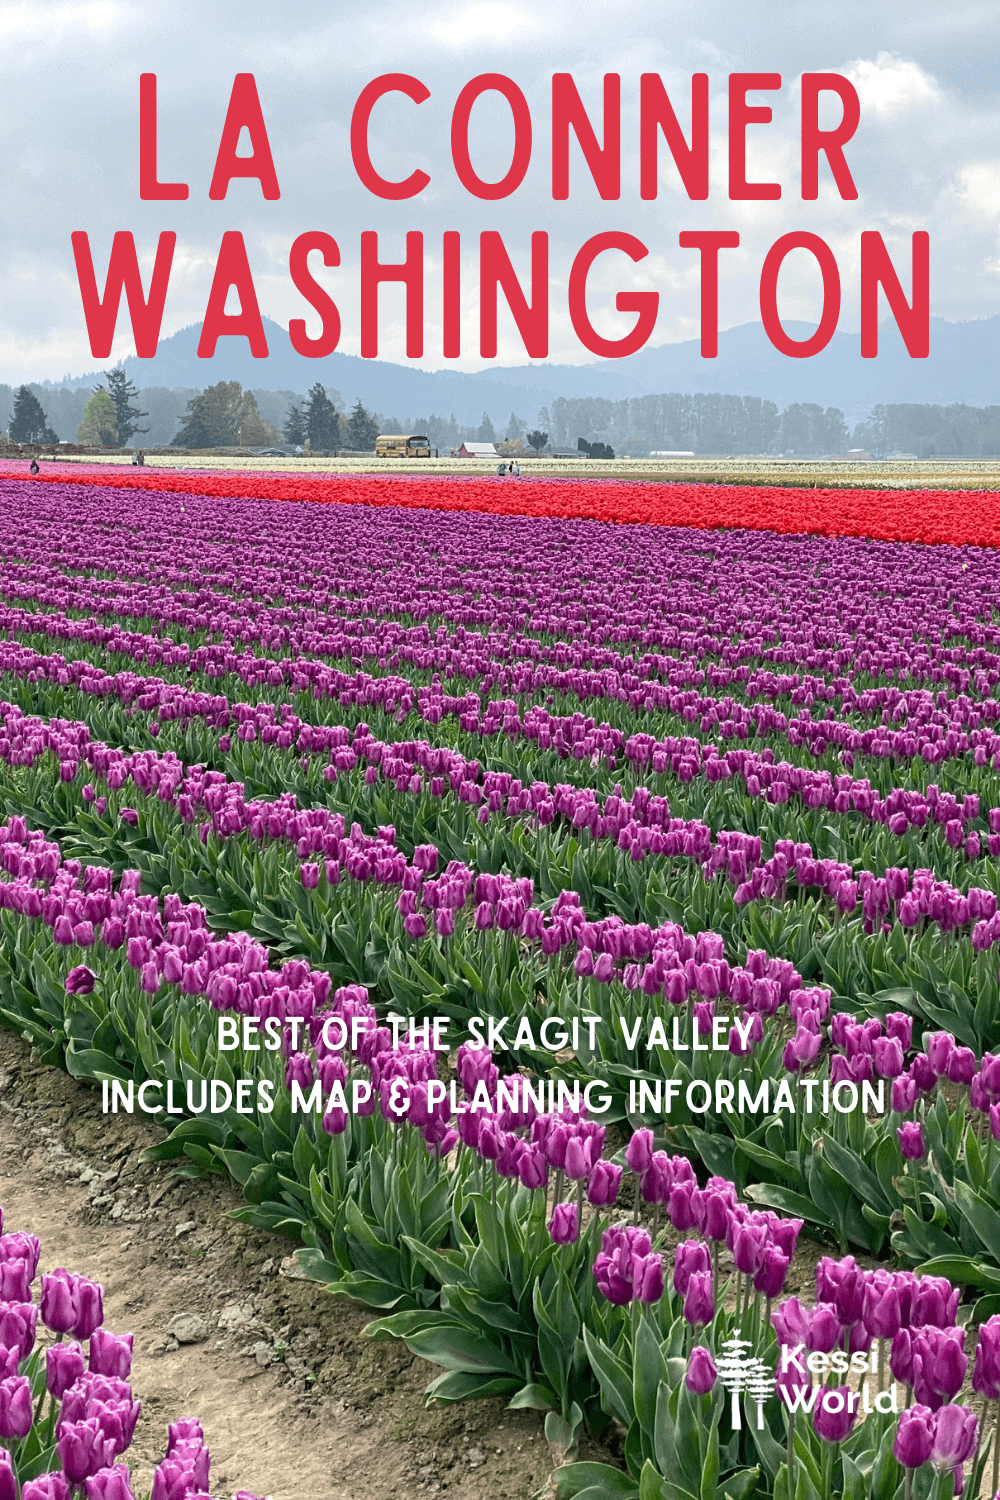 This Pinterest pin shows the colorful fields of tulips in bloom near La Conner, Washington.  There are patches of purple, red and yellow.  